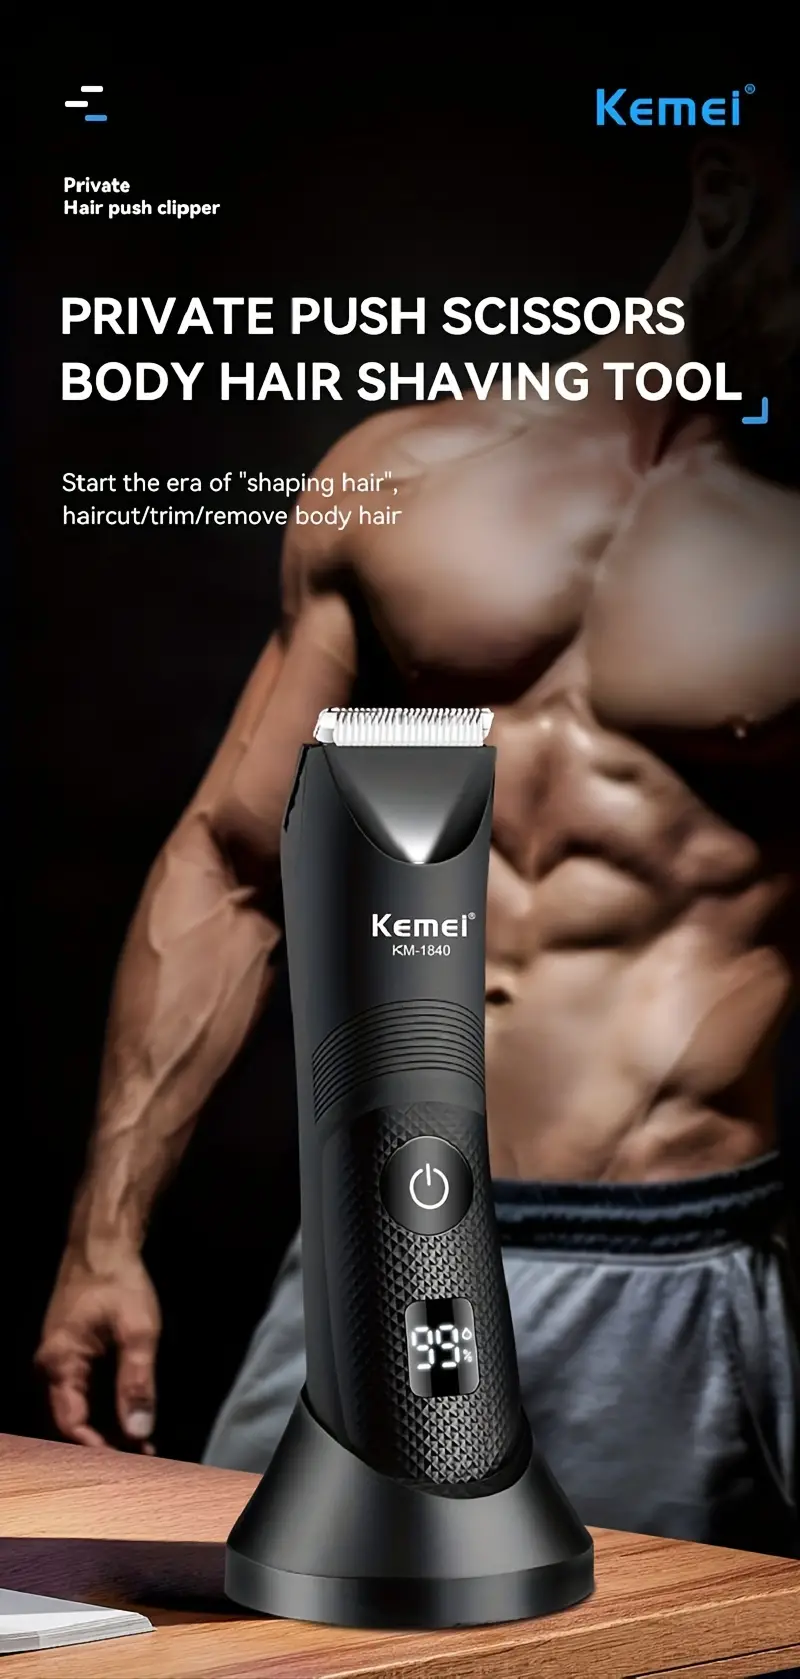 kemei body groin hair trimmer for men replaceable ceramic blade heads waterproof wet dry clippers led light and standing dock ultimate male hygiene razor and electric body shavers for balls details 0